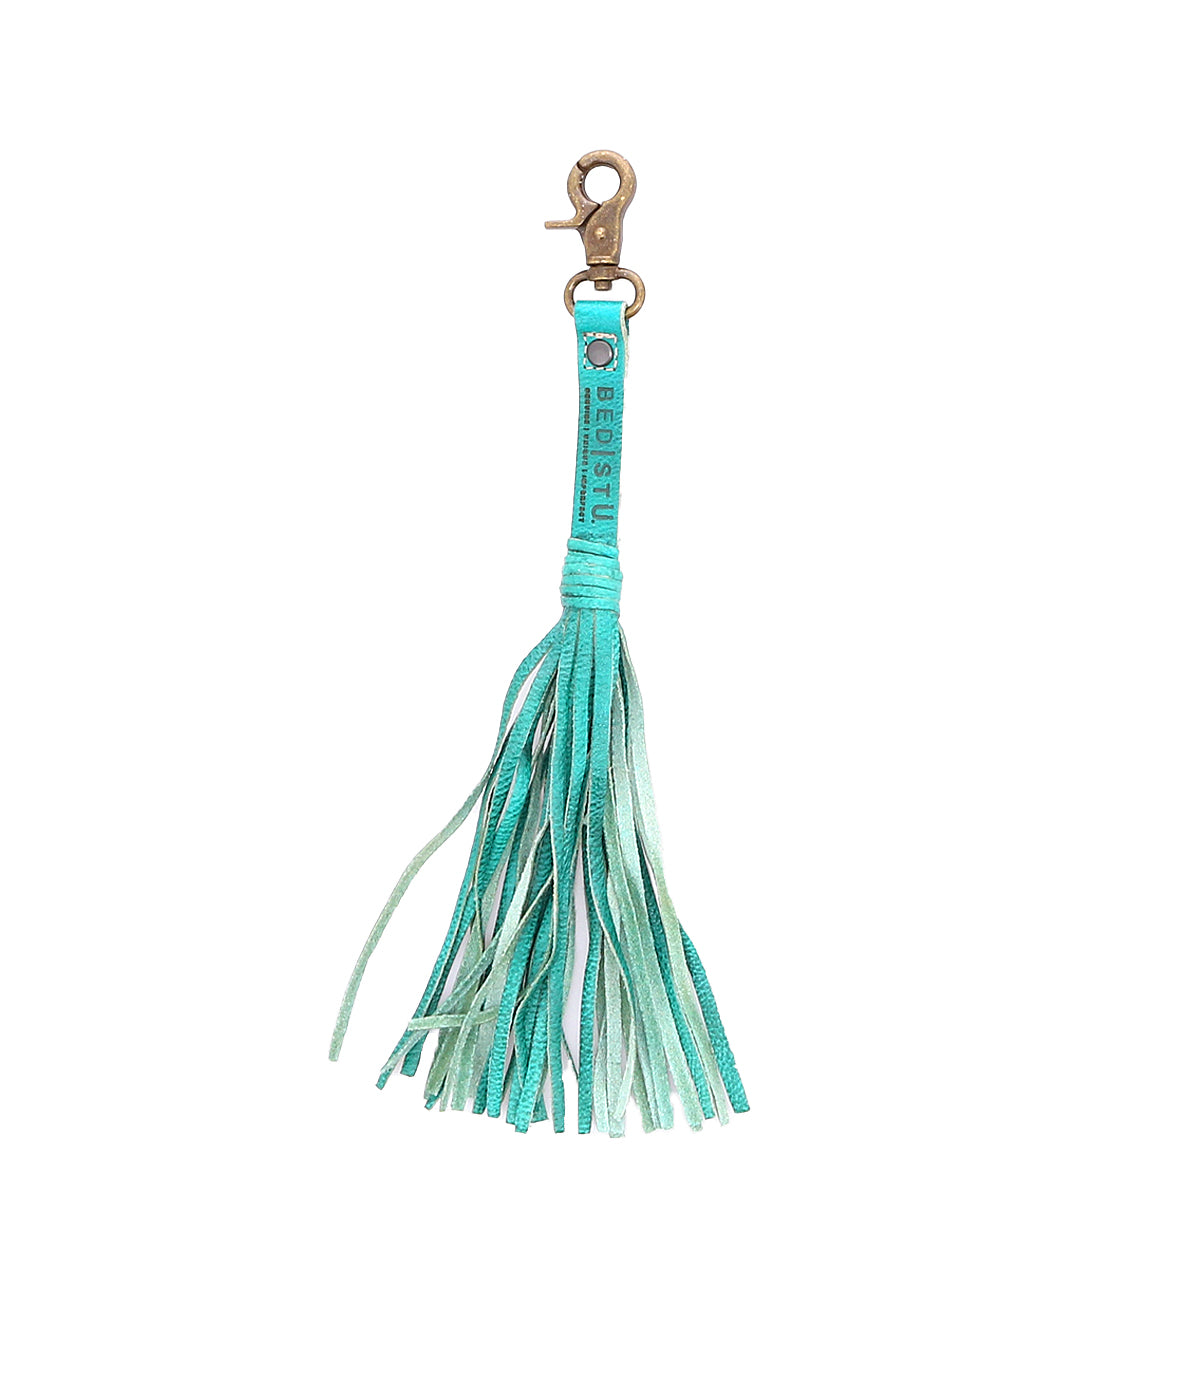 Turquoise leather Bed Stu Tassel Clip, an accessory for personal expression.